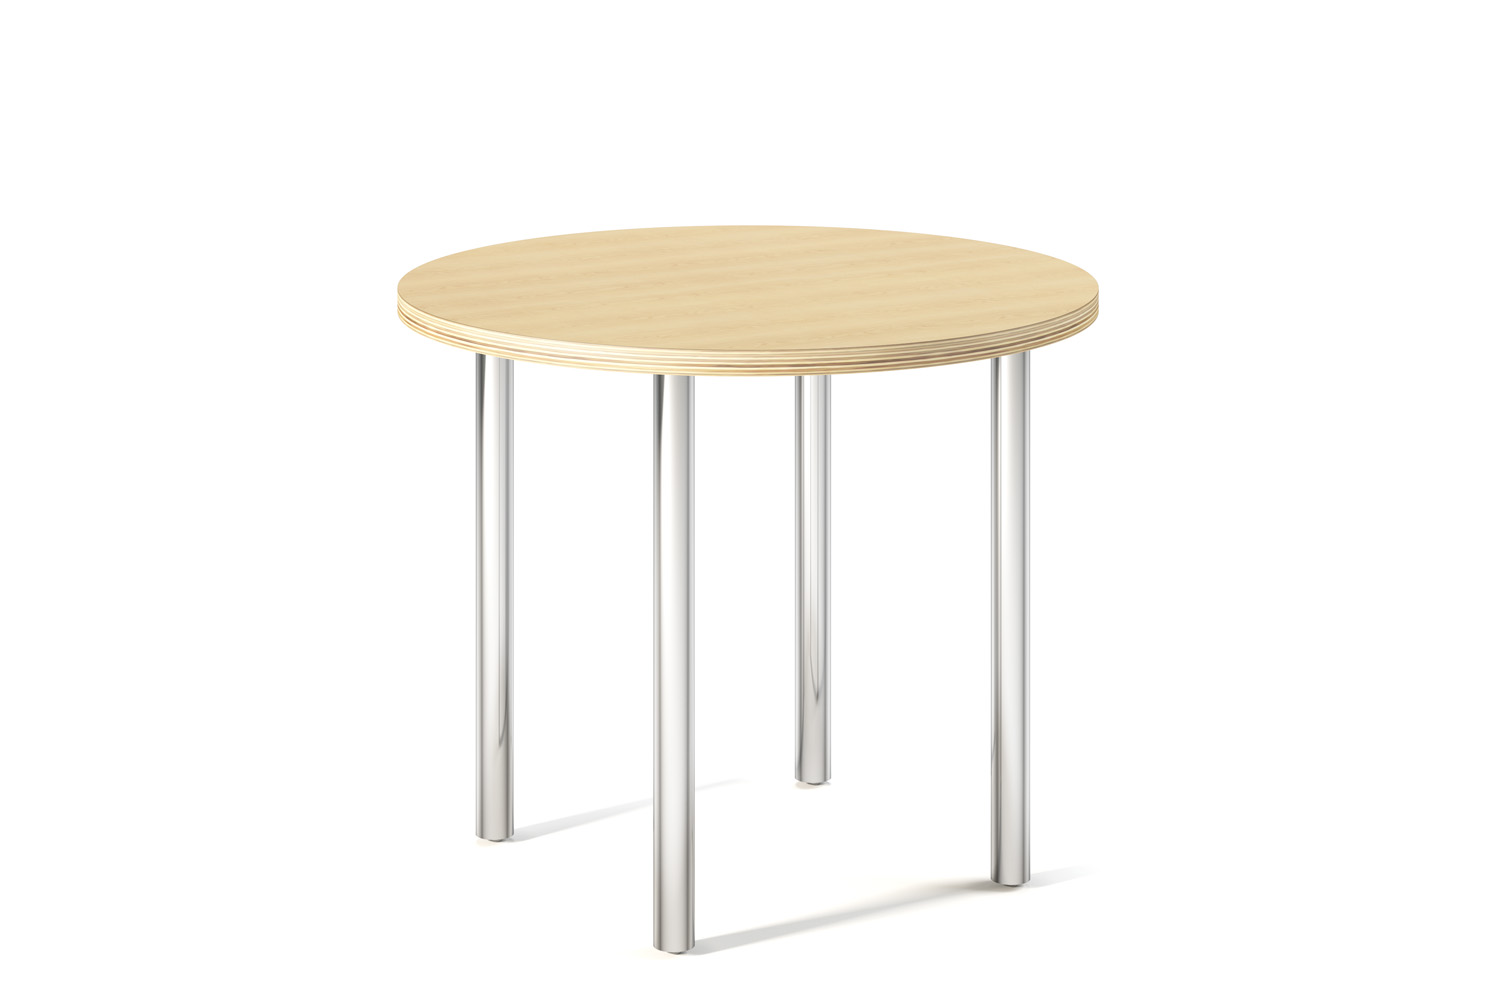 Post 36 Diameter Cafe Table